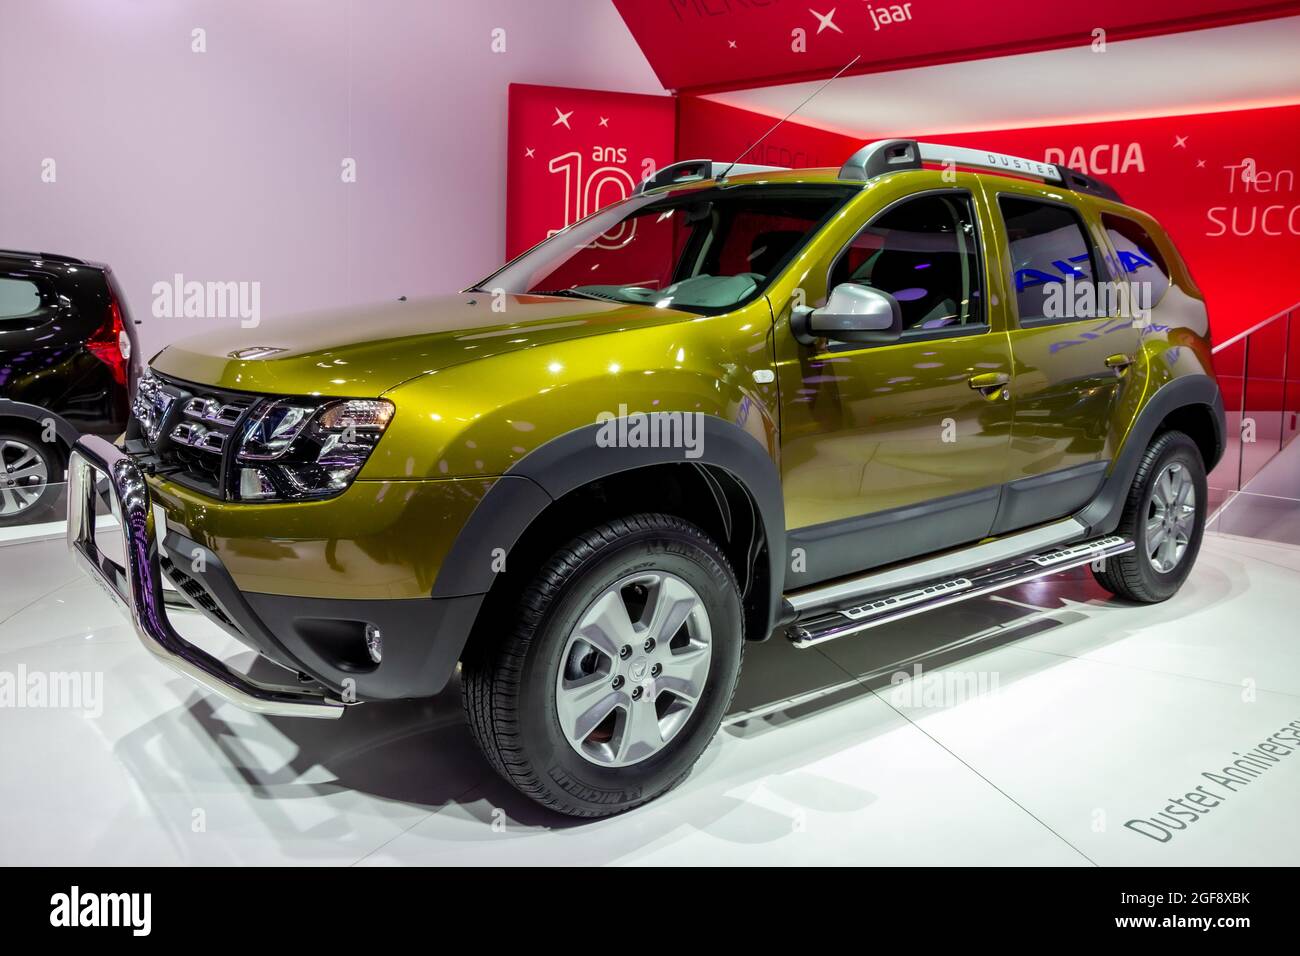 Dacia Duster car showcased at the Brussels Expo Autosalon motor show. Belgium - January 12, 2016 Stock Photo